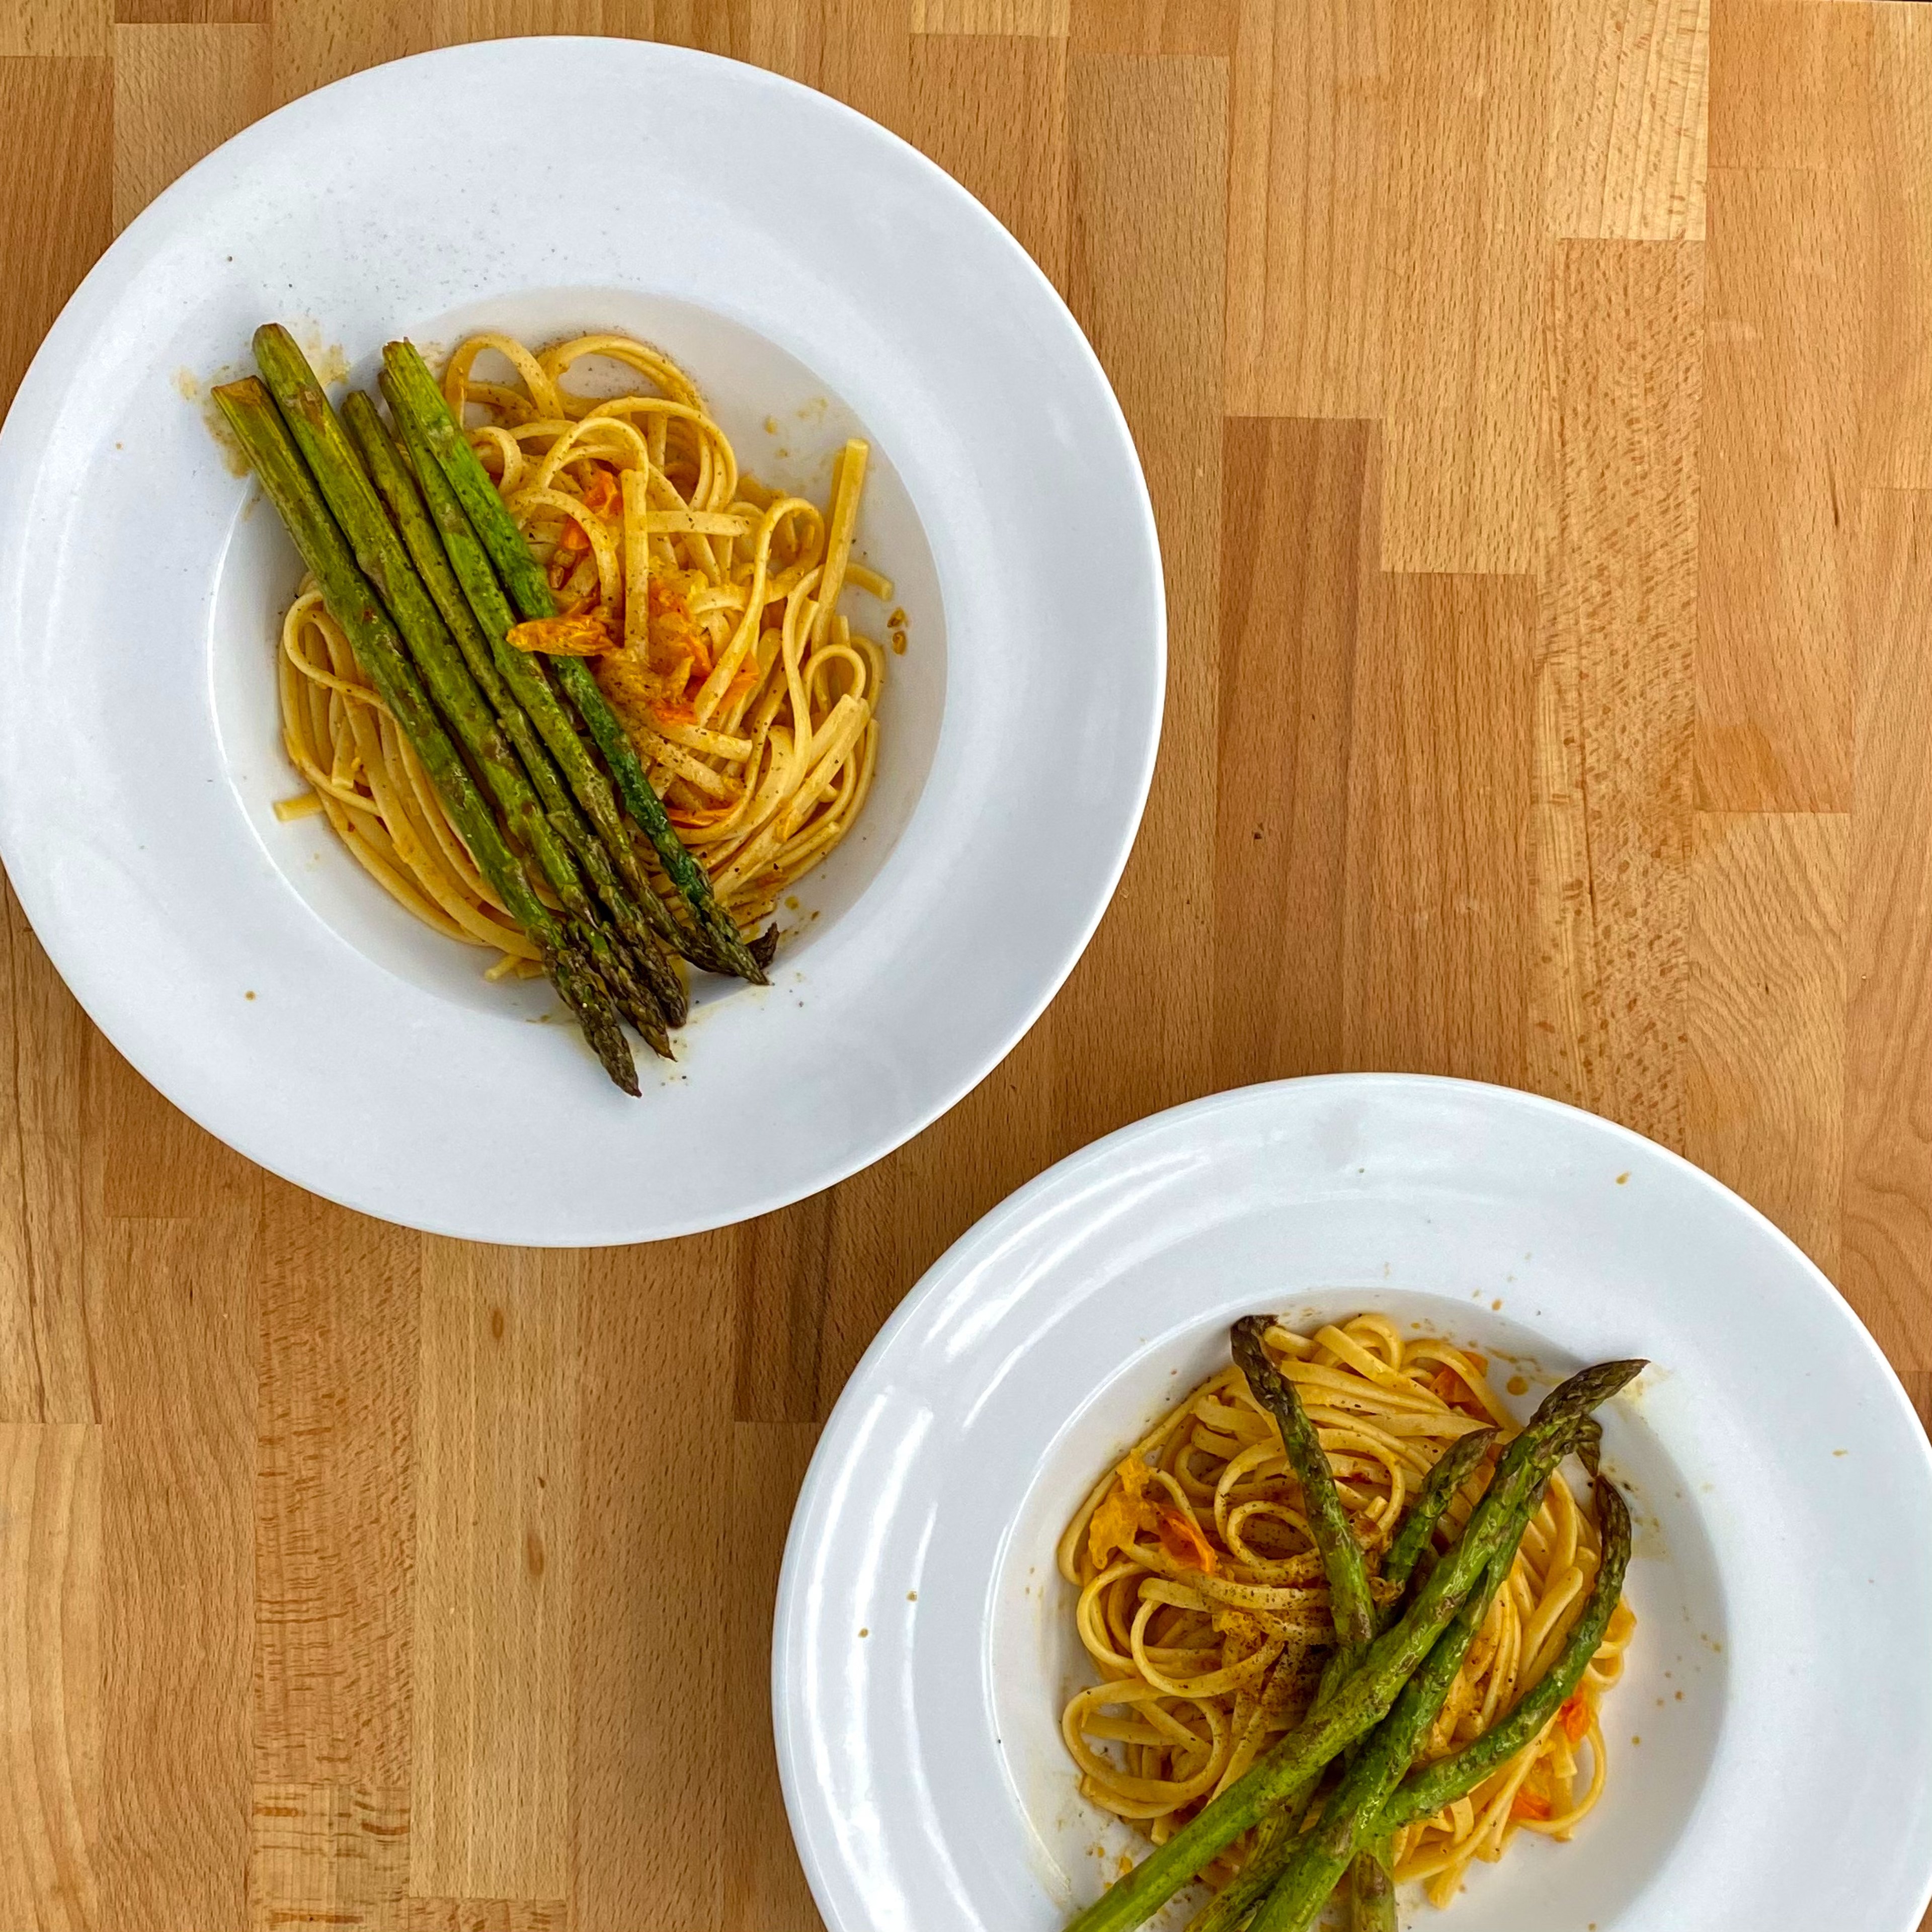 Grilled asparagus with lemon-pasta